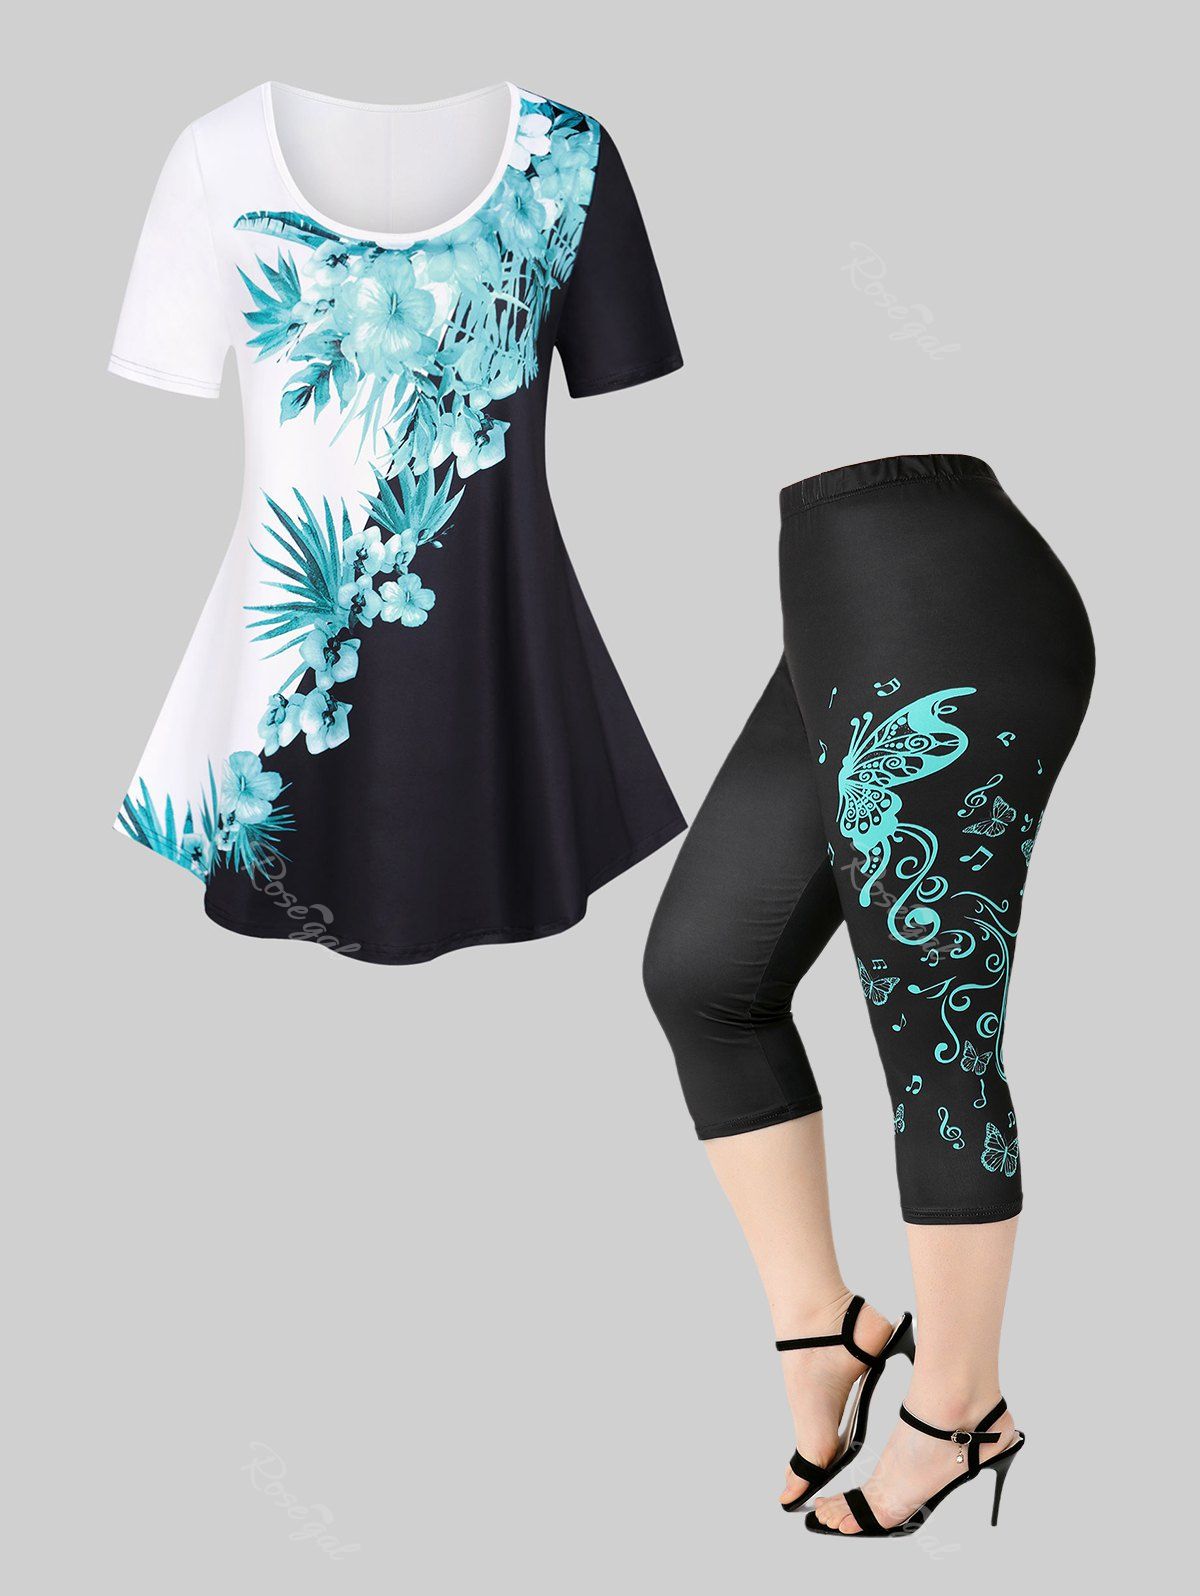 New Floral Print Colorblock Tee and High Waist Butterfly Print Gym Capri Leggings Plus Size Summer Outfit  